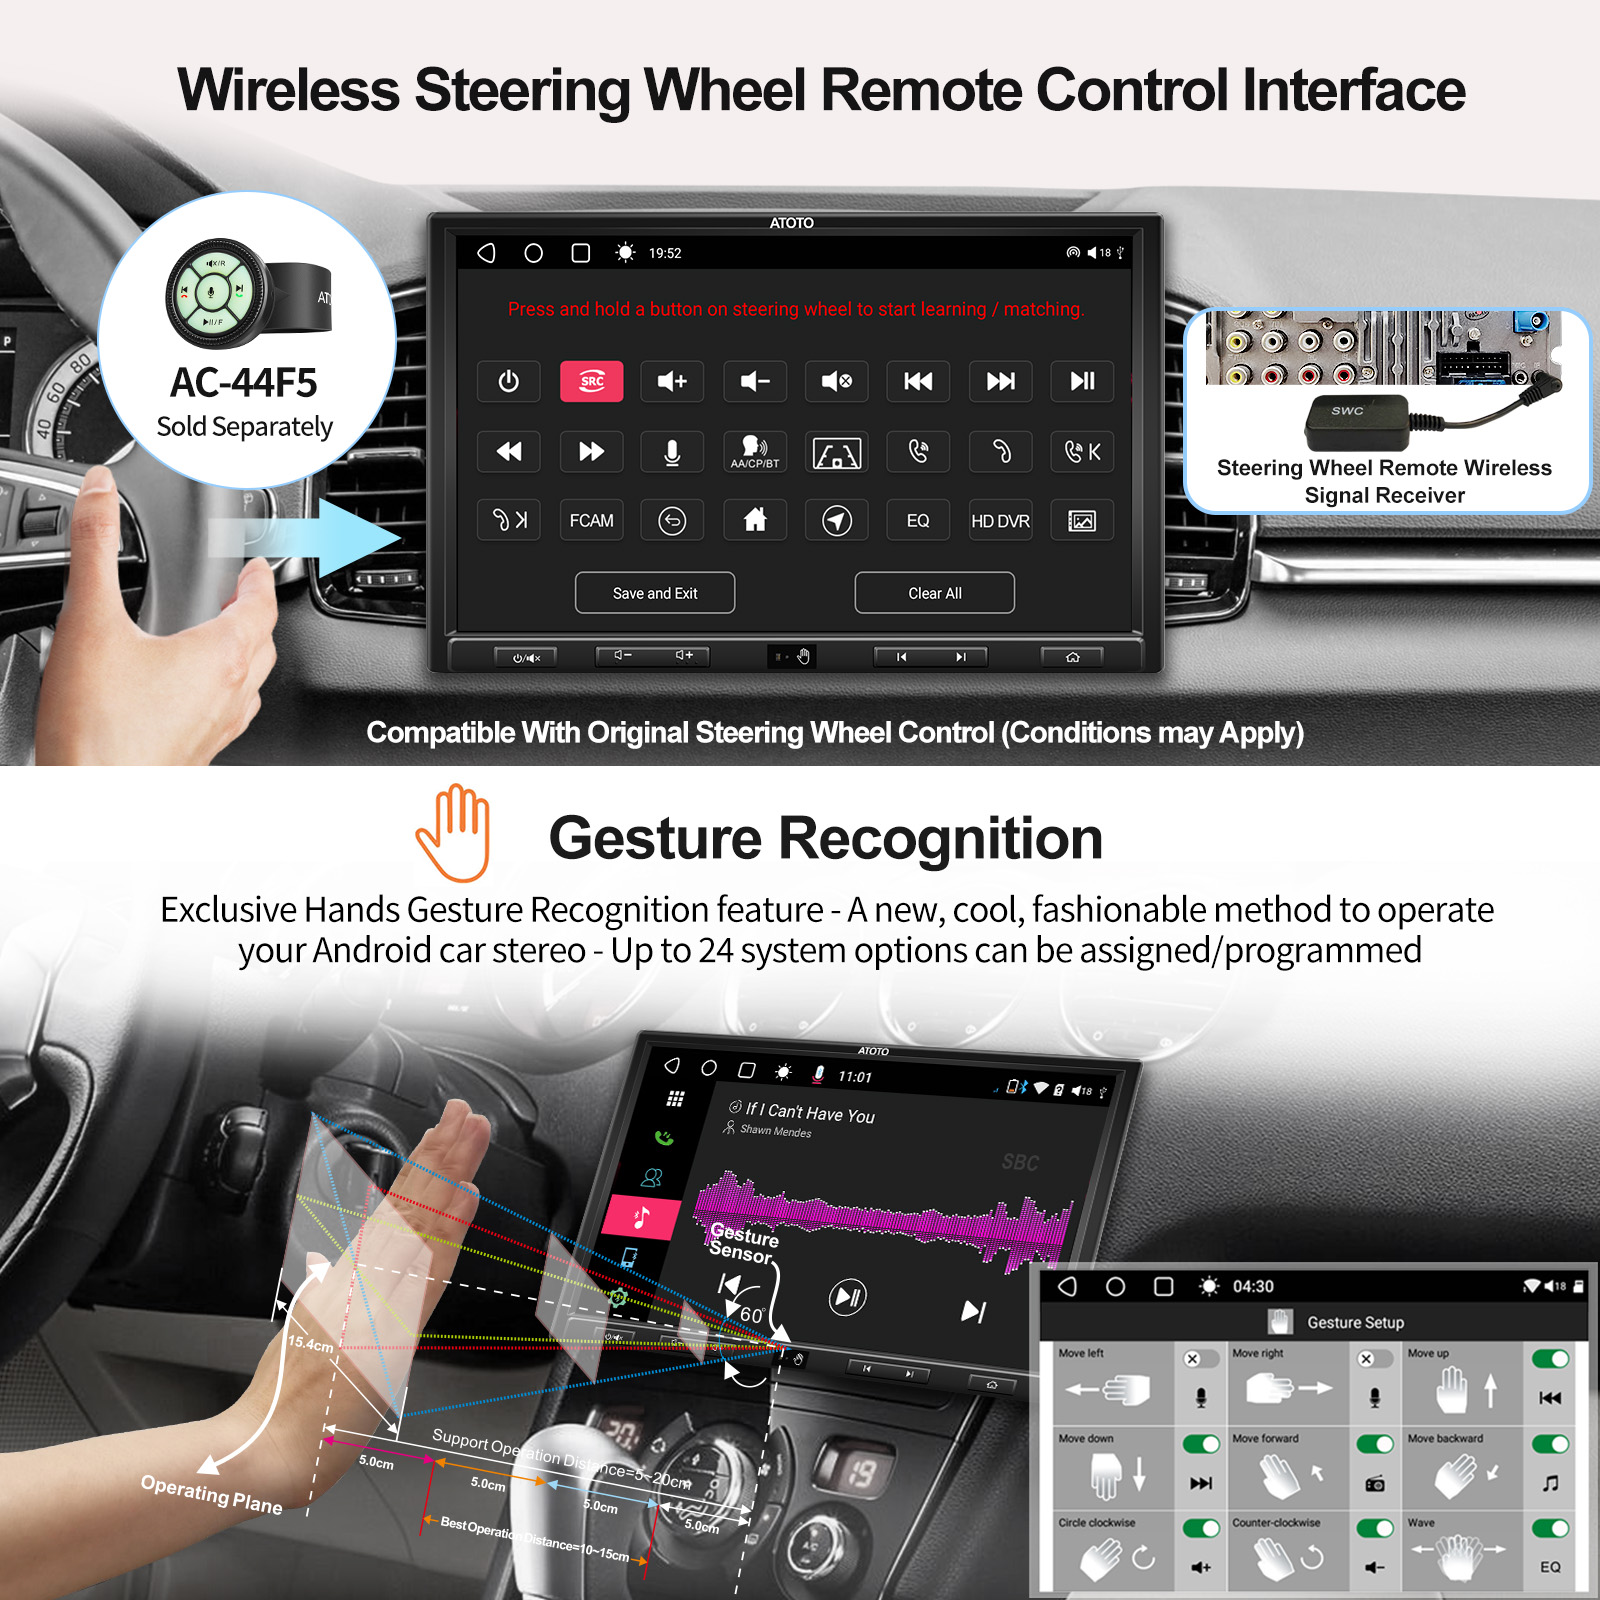  ATOTO S8G2114PM 2nd Gen Android Car Stereo, 10.1-inch QLED  Display, Dual Bluetooth, Wi-Fi & USB Tethering, Speed Compensated Volume  Control, 6 Touch Gestures : Electronics